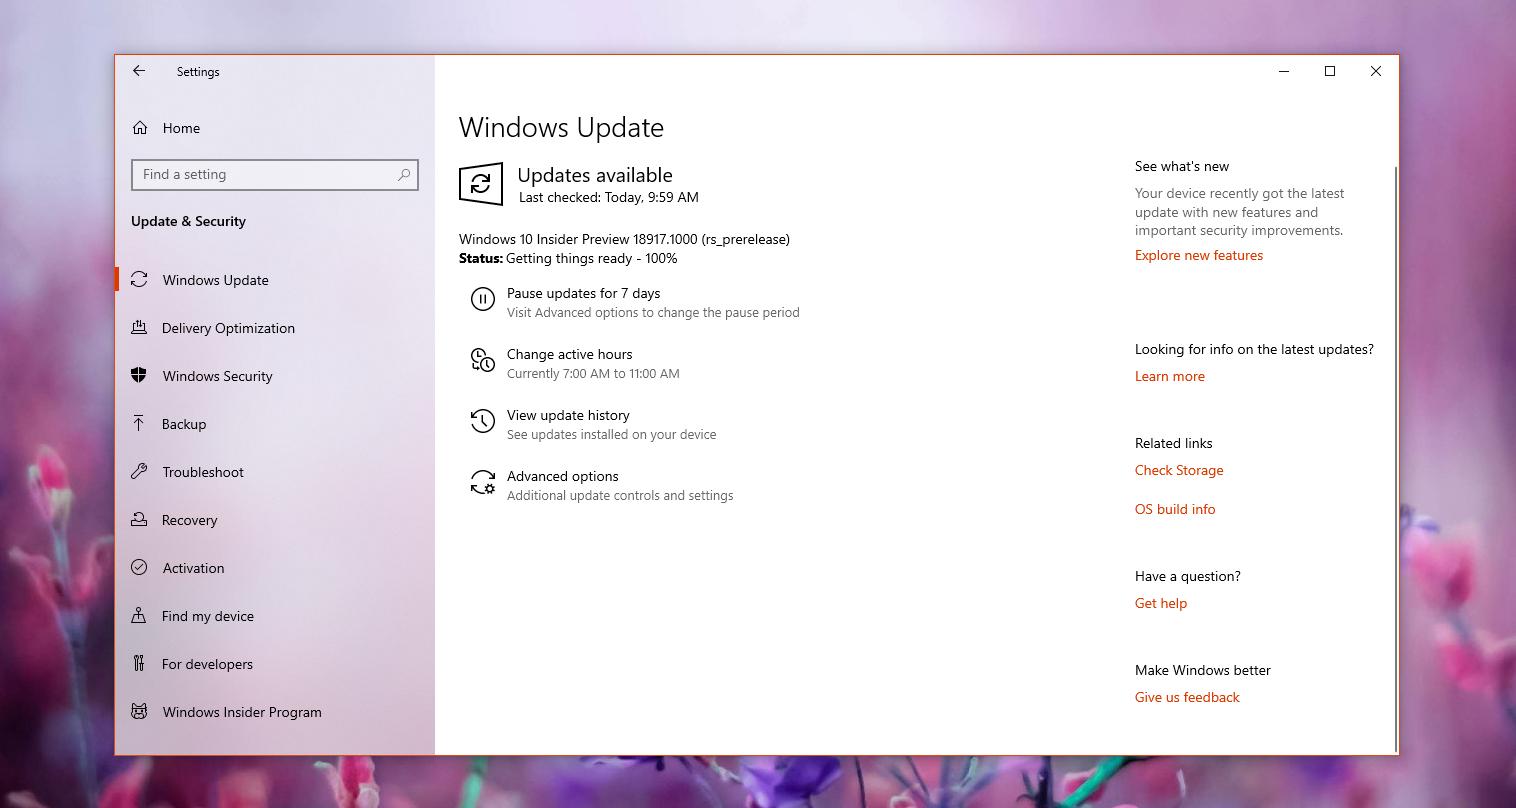 Microsoft Releases Windows 10 20H1 Build 18917 with Windows Update Improvements